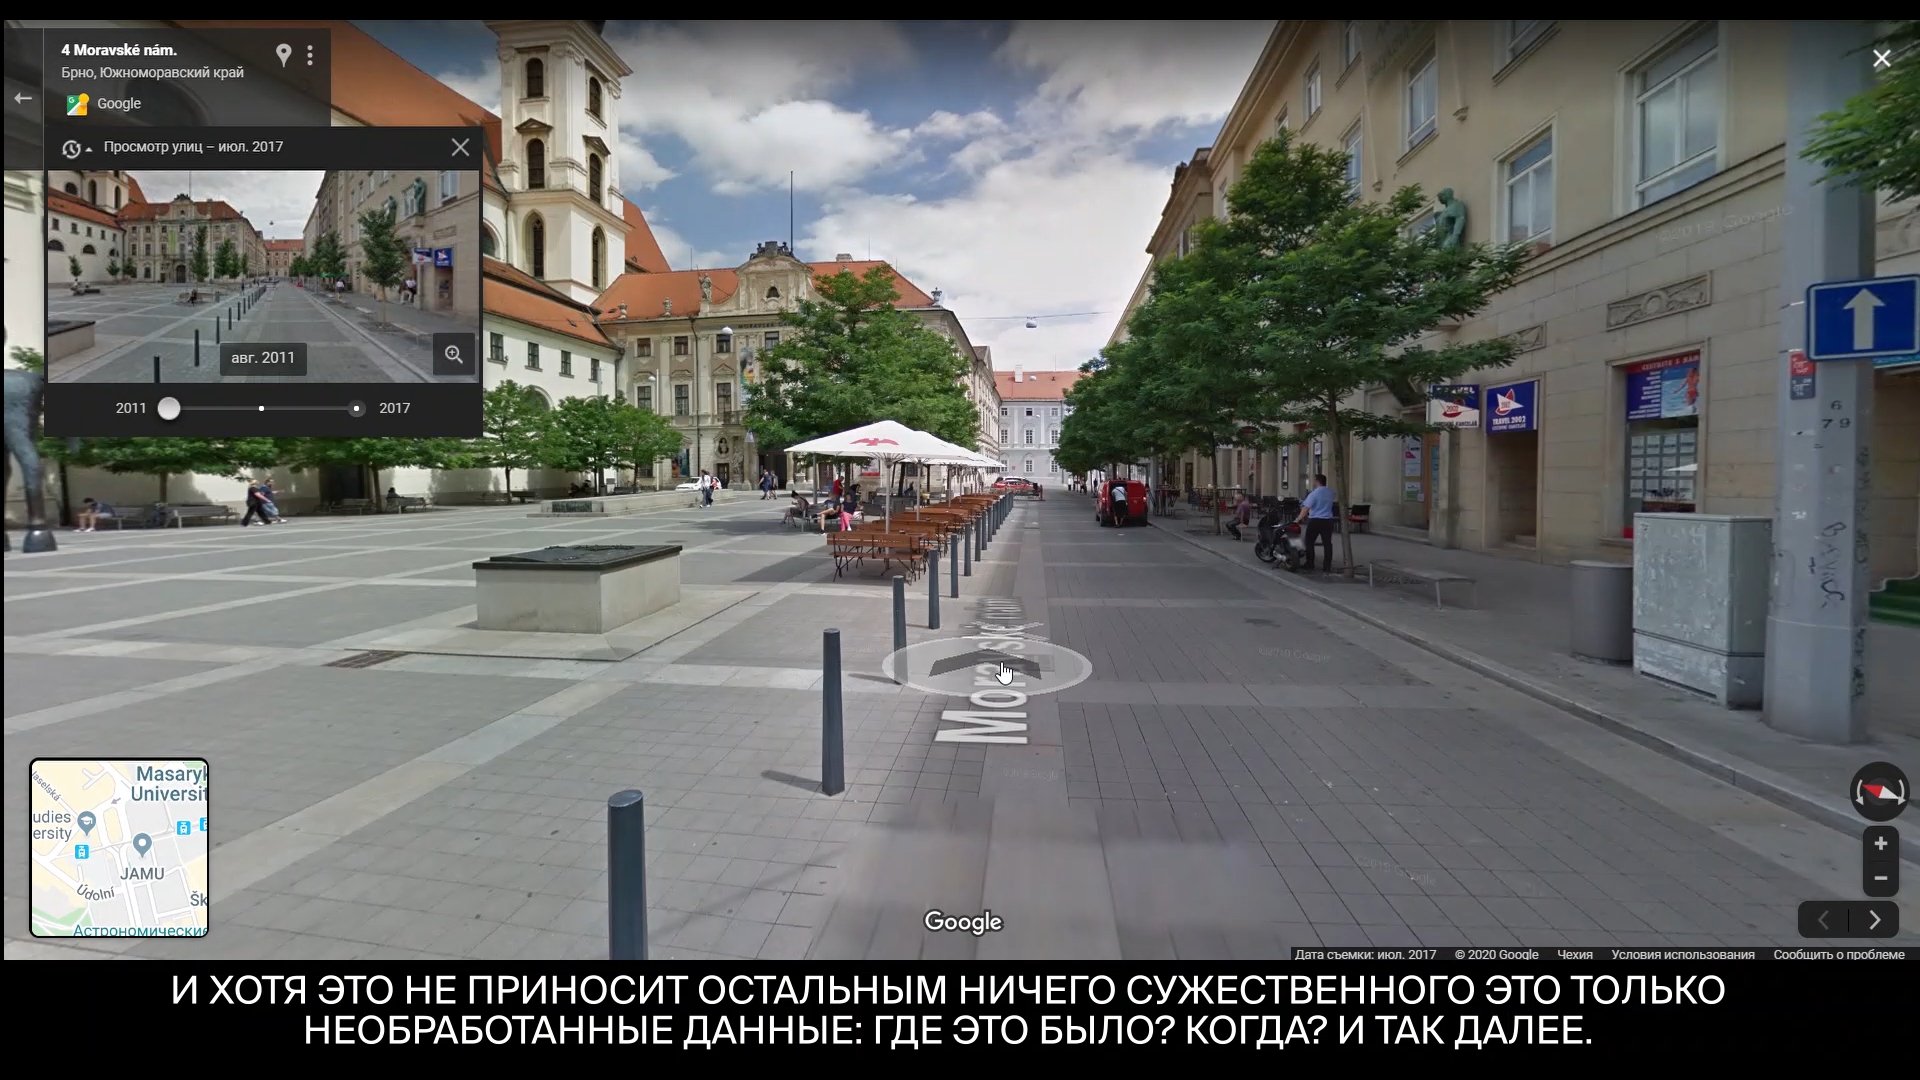 brno, 2020. This projects includes a video essay of a walk in Brno and the artist’s inner conflict of two roles: a tourist and an applicant to the city’s university; as well as an interactive game where the viewer can digitally experience that walk